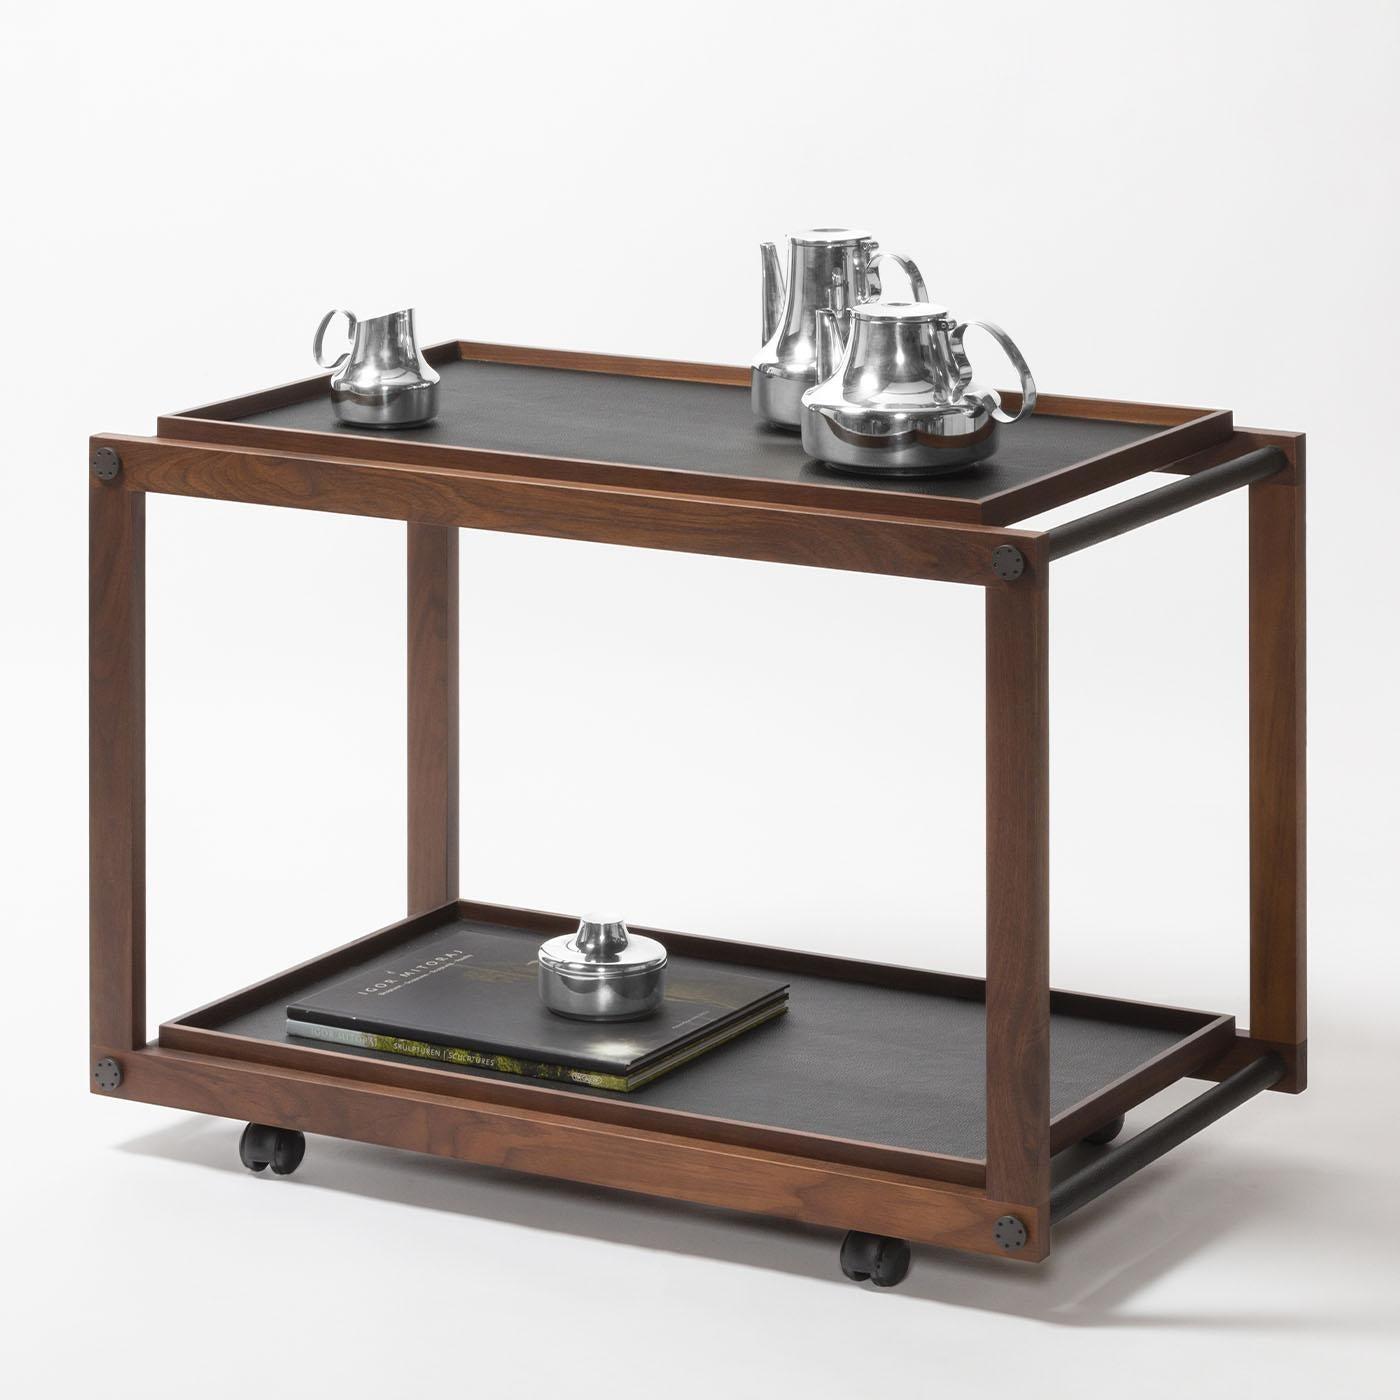 Wood structure is available in different finishes featuring fine leather and metal inserts. Provided with two removable trays and omnidirectional wheels. Different walnut wood and metal finishes are available upon request.